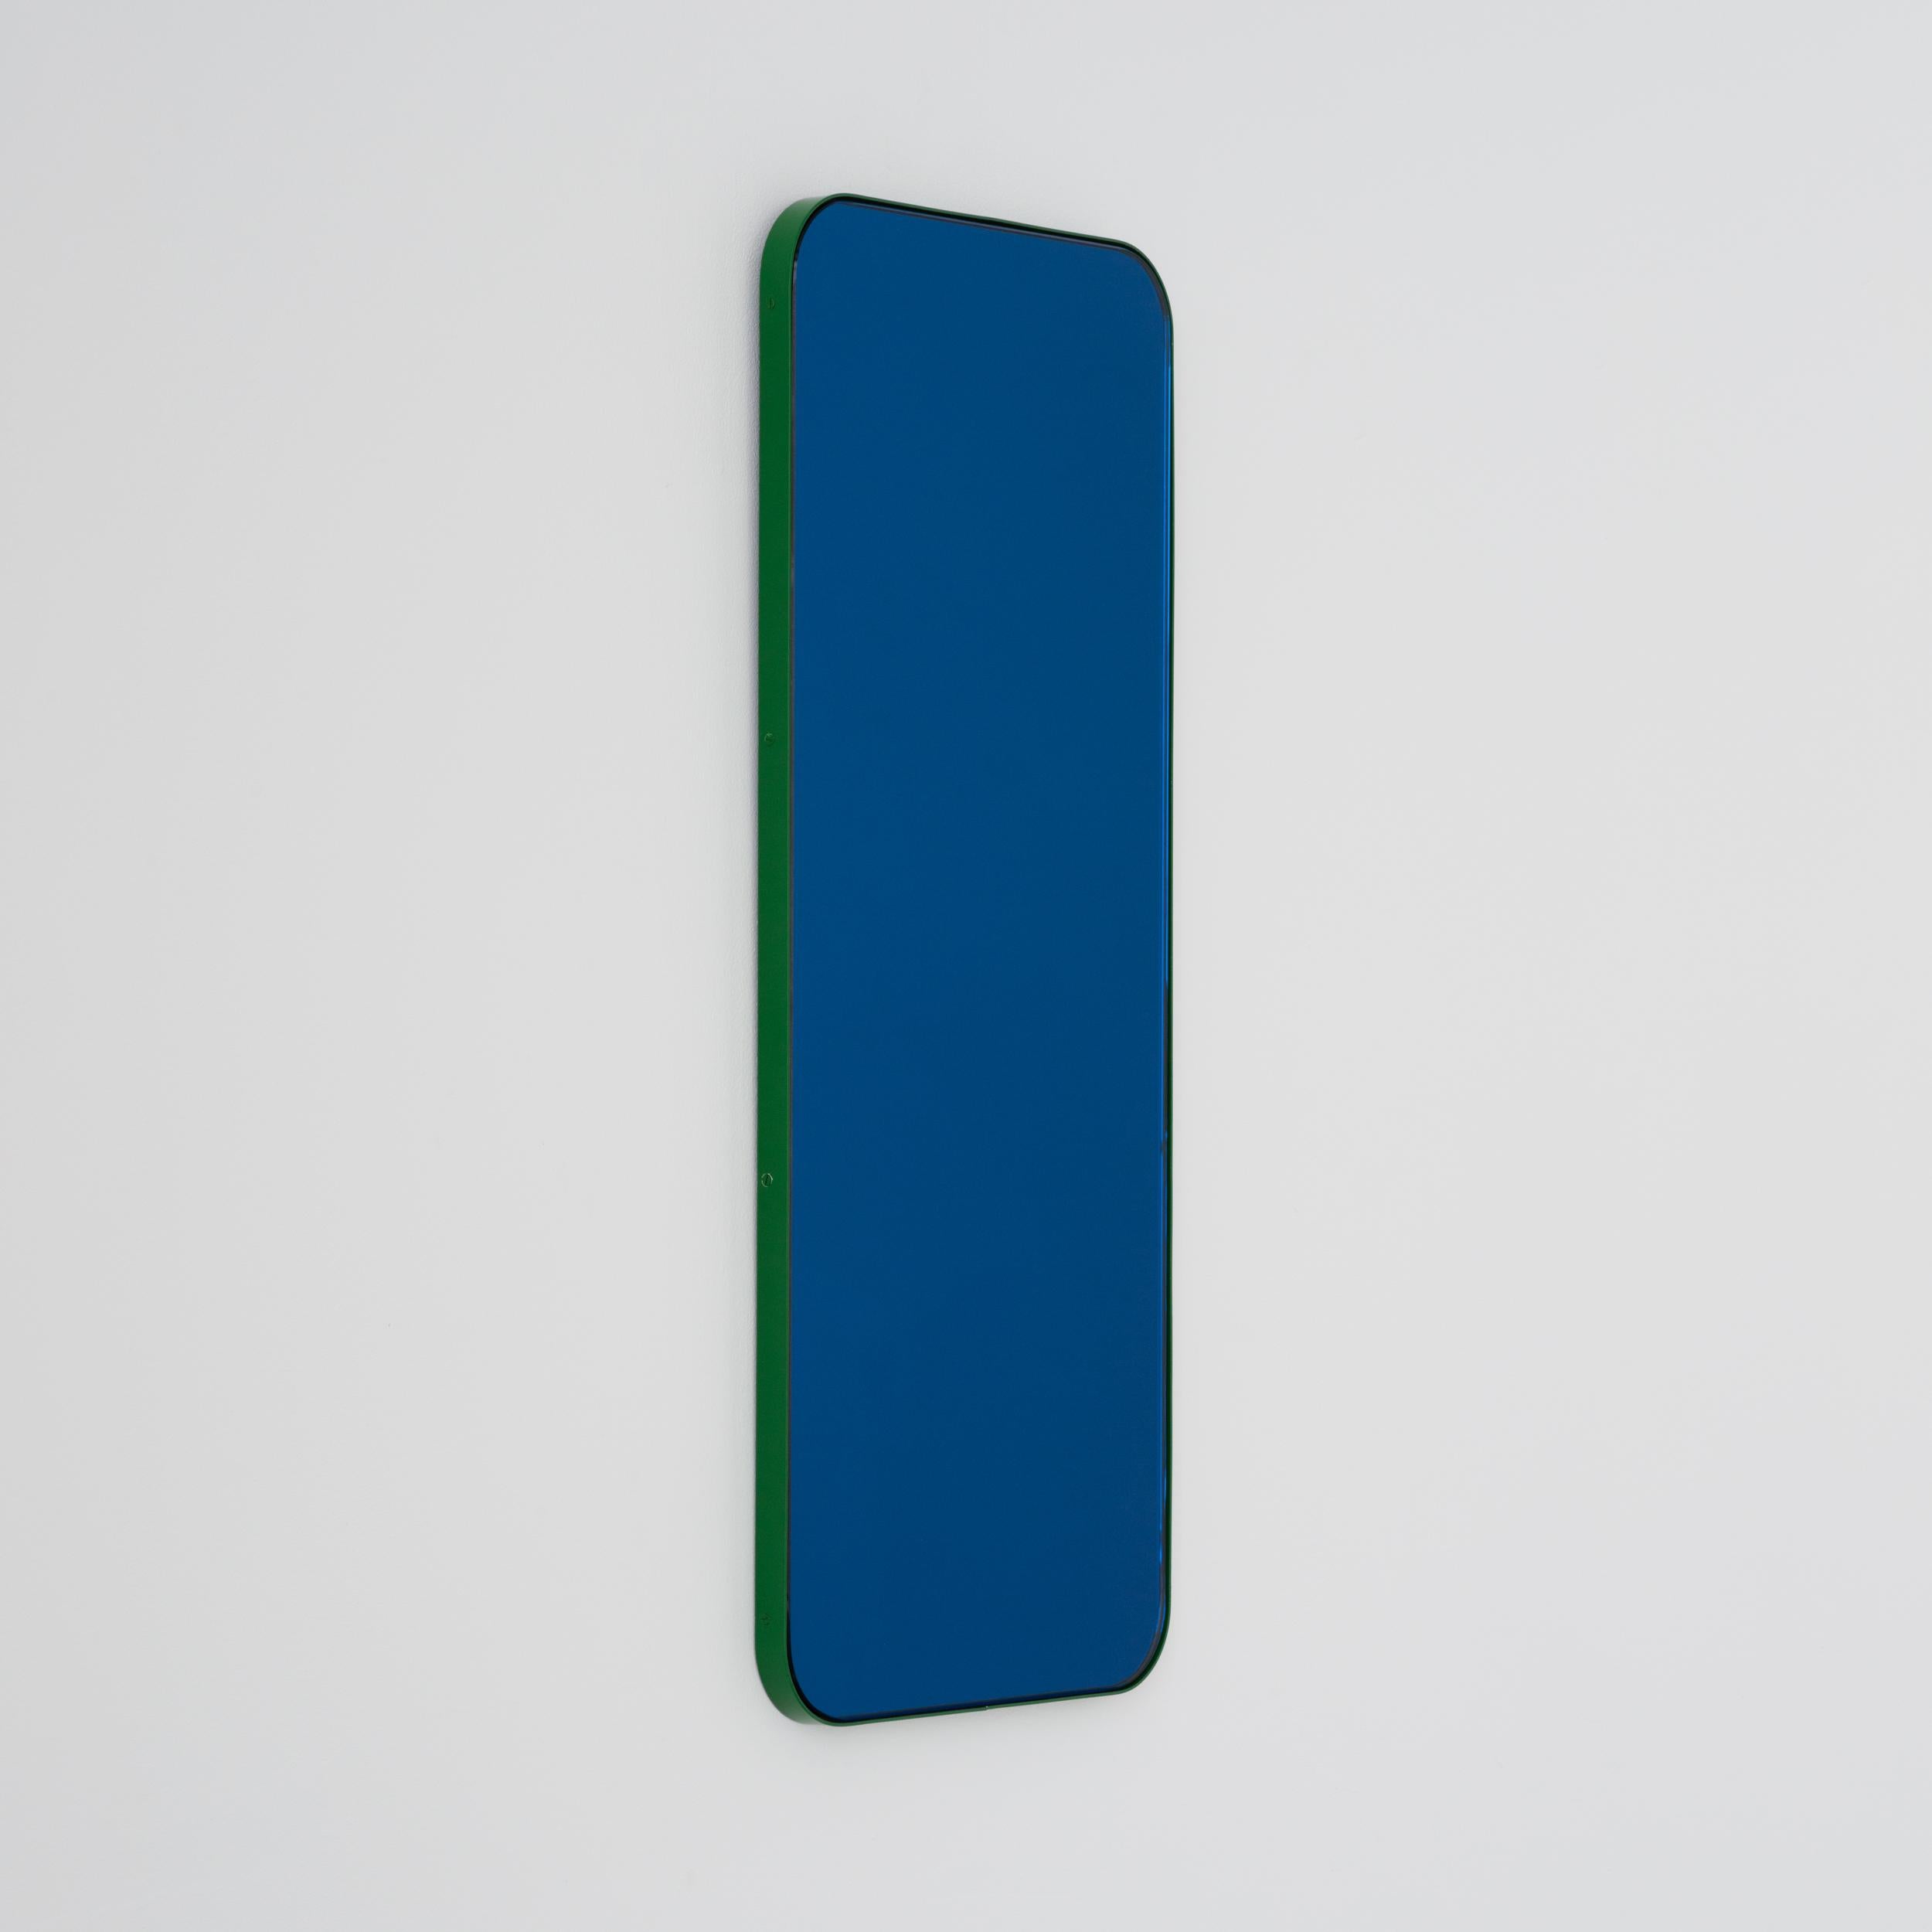 Powder-Coated Quadris Rectangular Contemporary Blue Mirror with a Modern Green Frame, Large For Sale